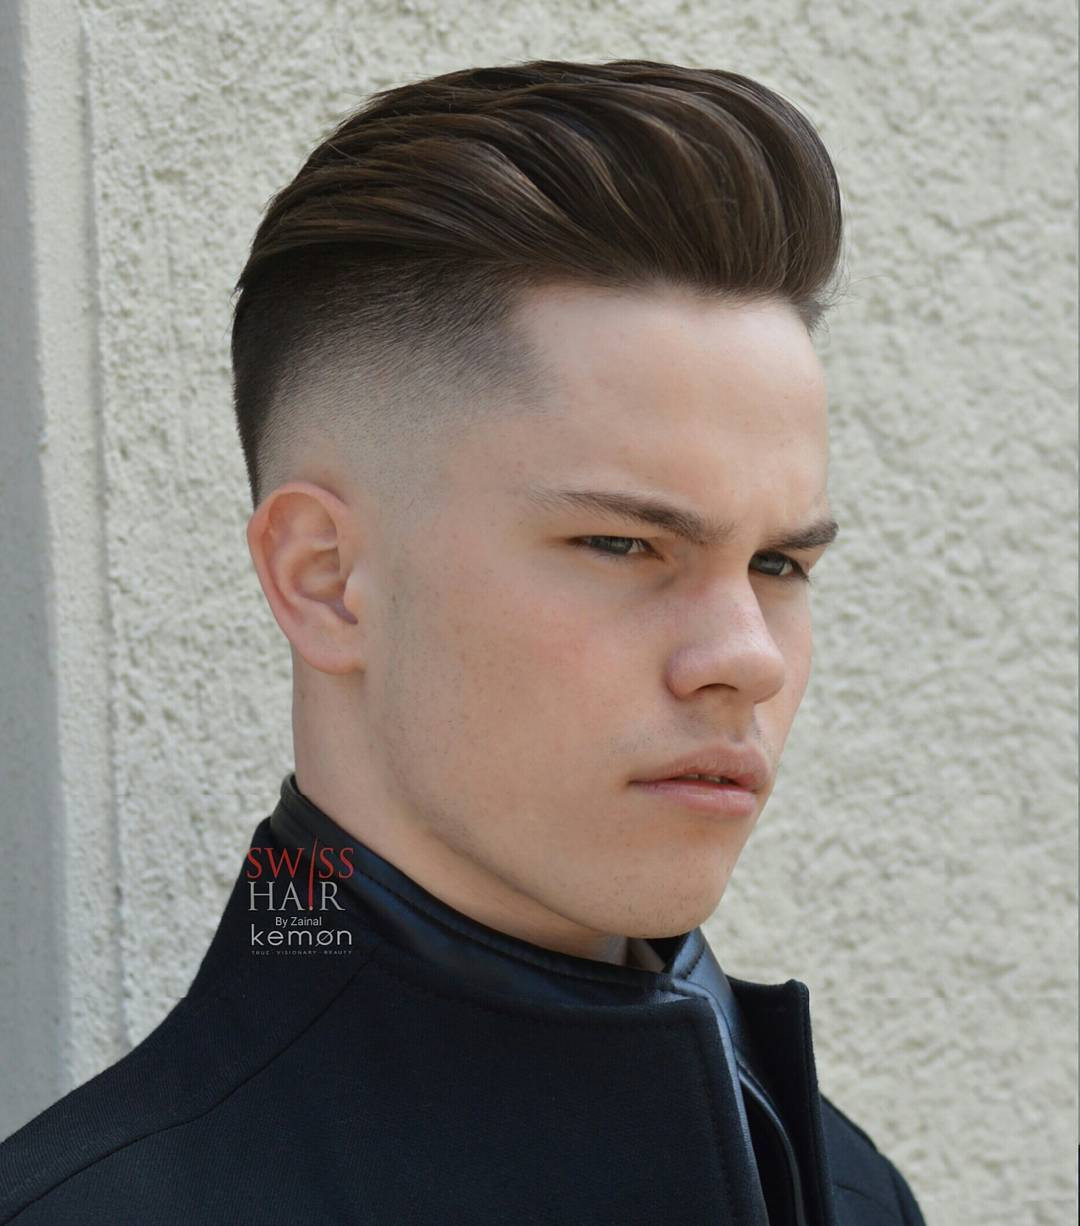 Medium Undercut Hairstyle
 60 Best Medium Length Hairstyles and Haircuts for Men